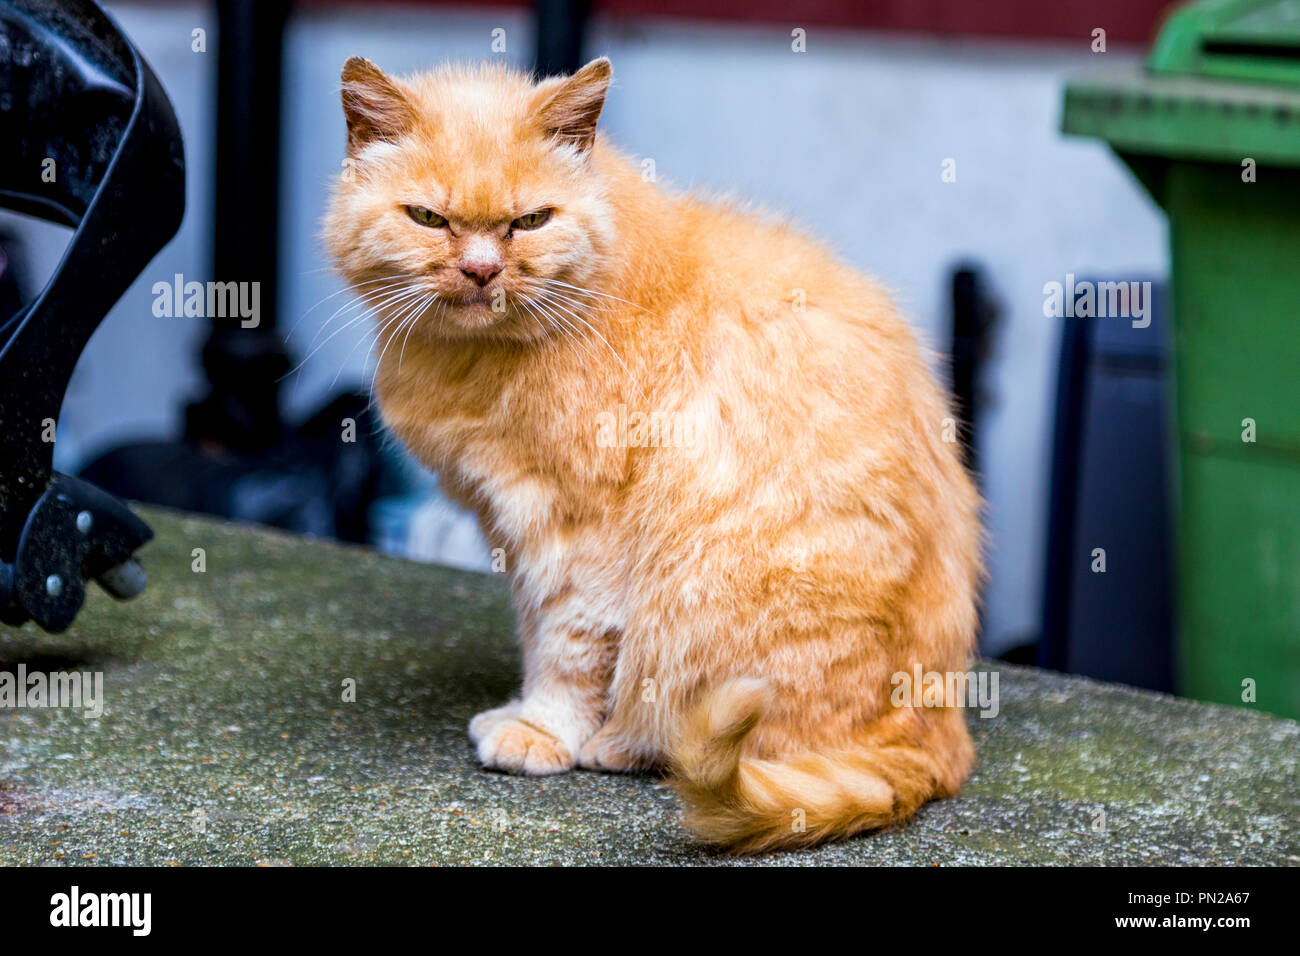 Angry grumpy ginger cat making a face Stock Photo